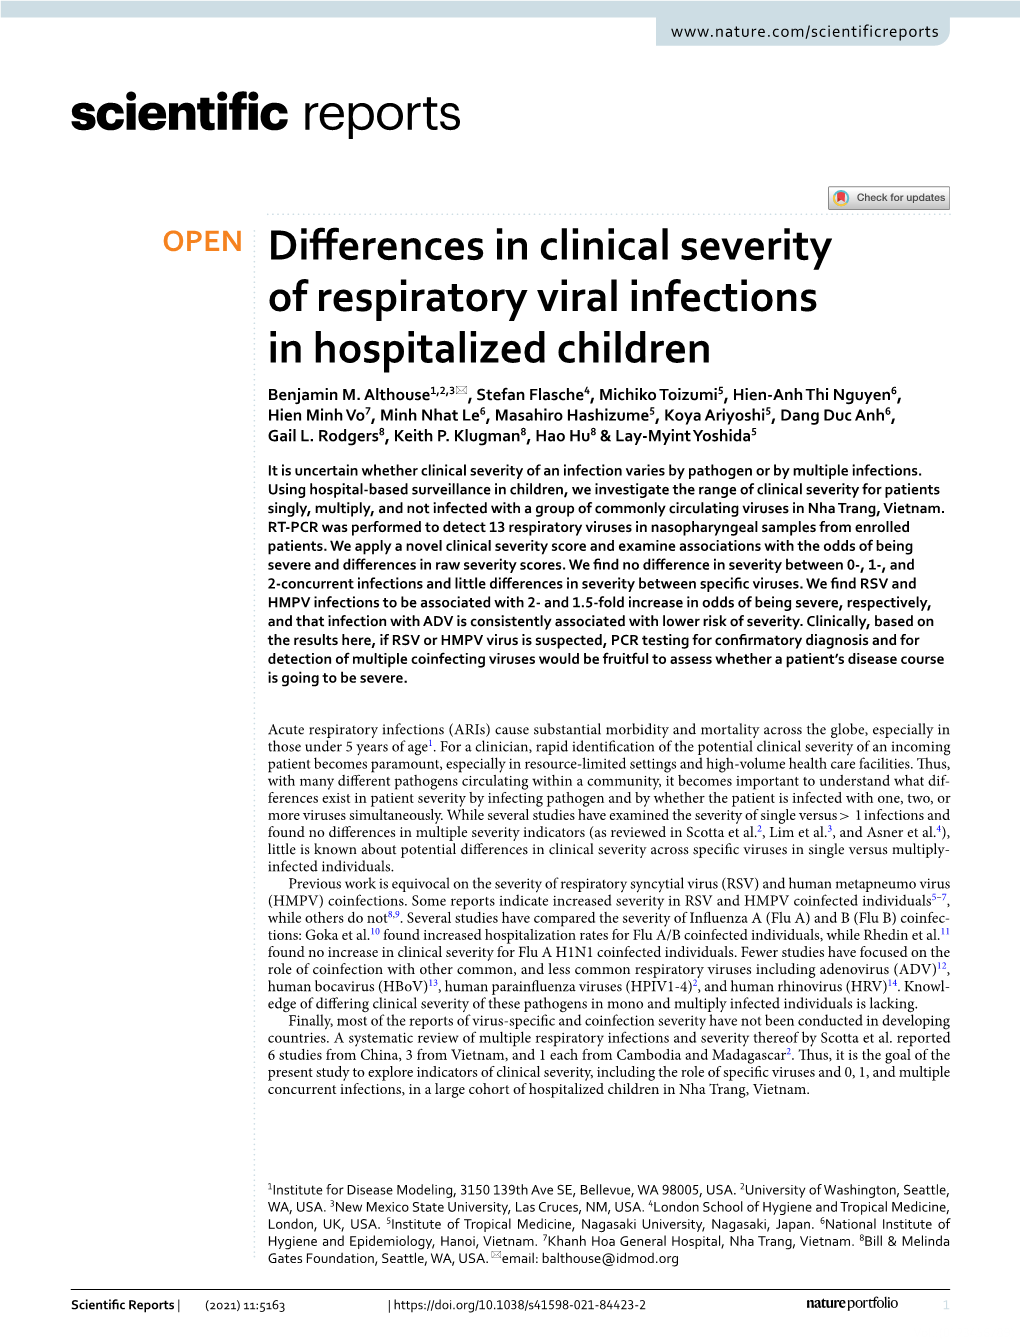 Differences in Clinical Severity of Respiratory Viral Infections in Hospitalized Children